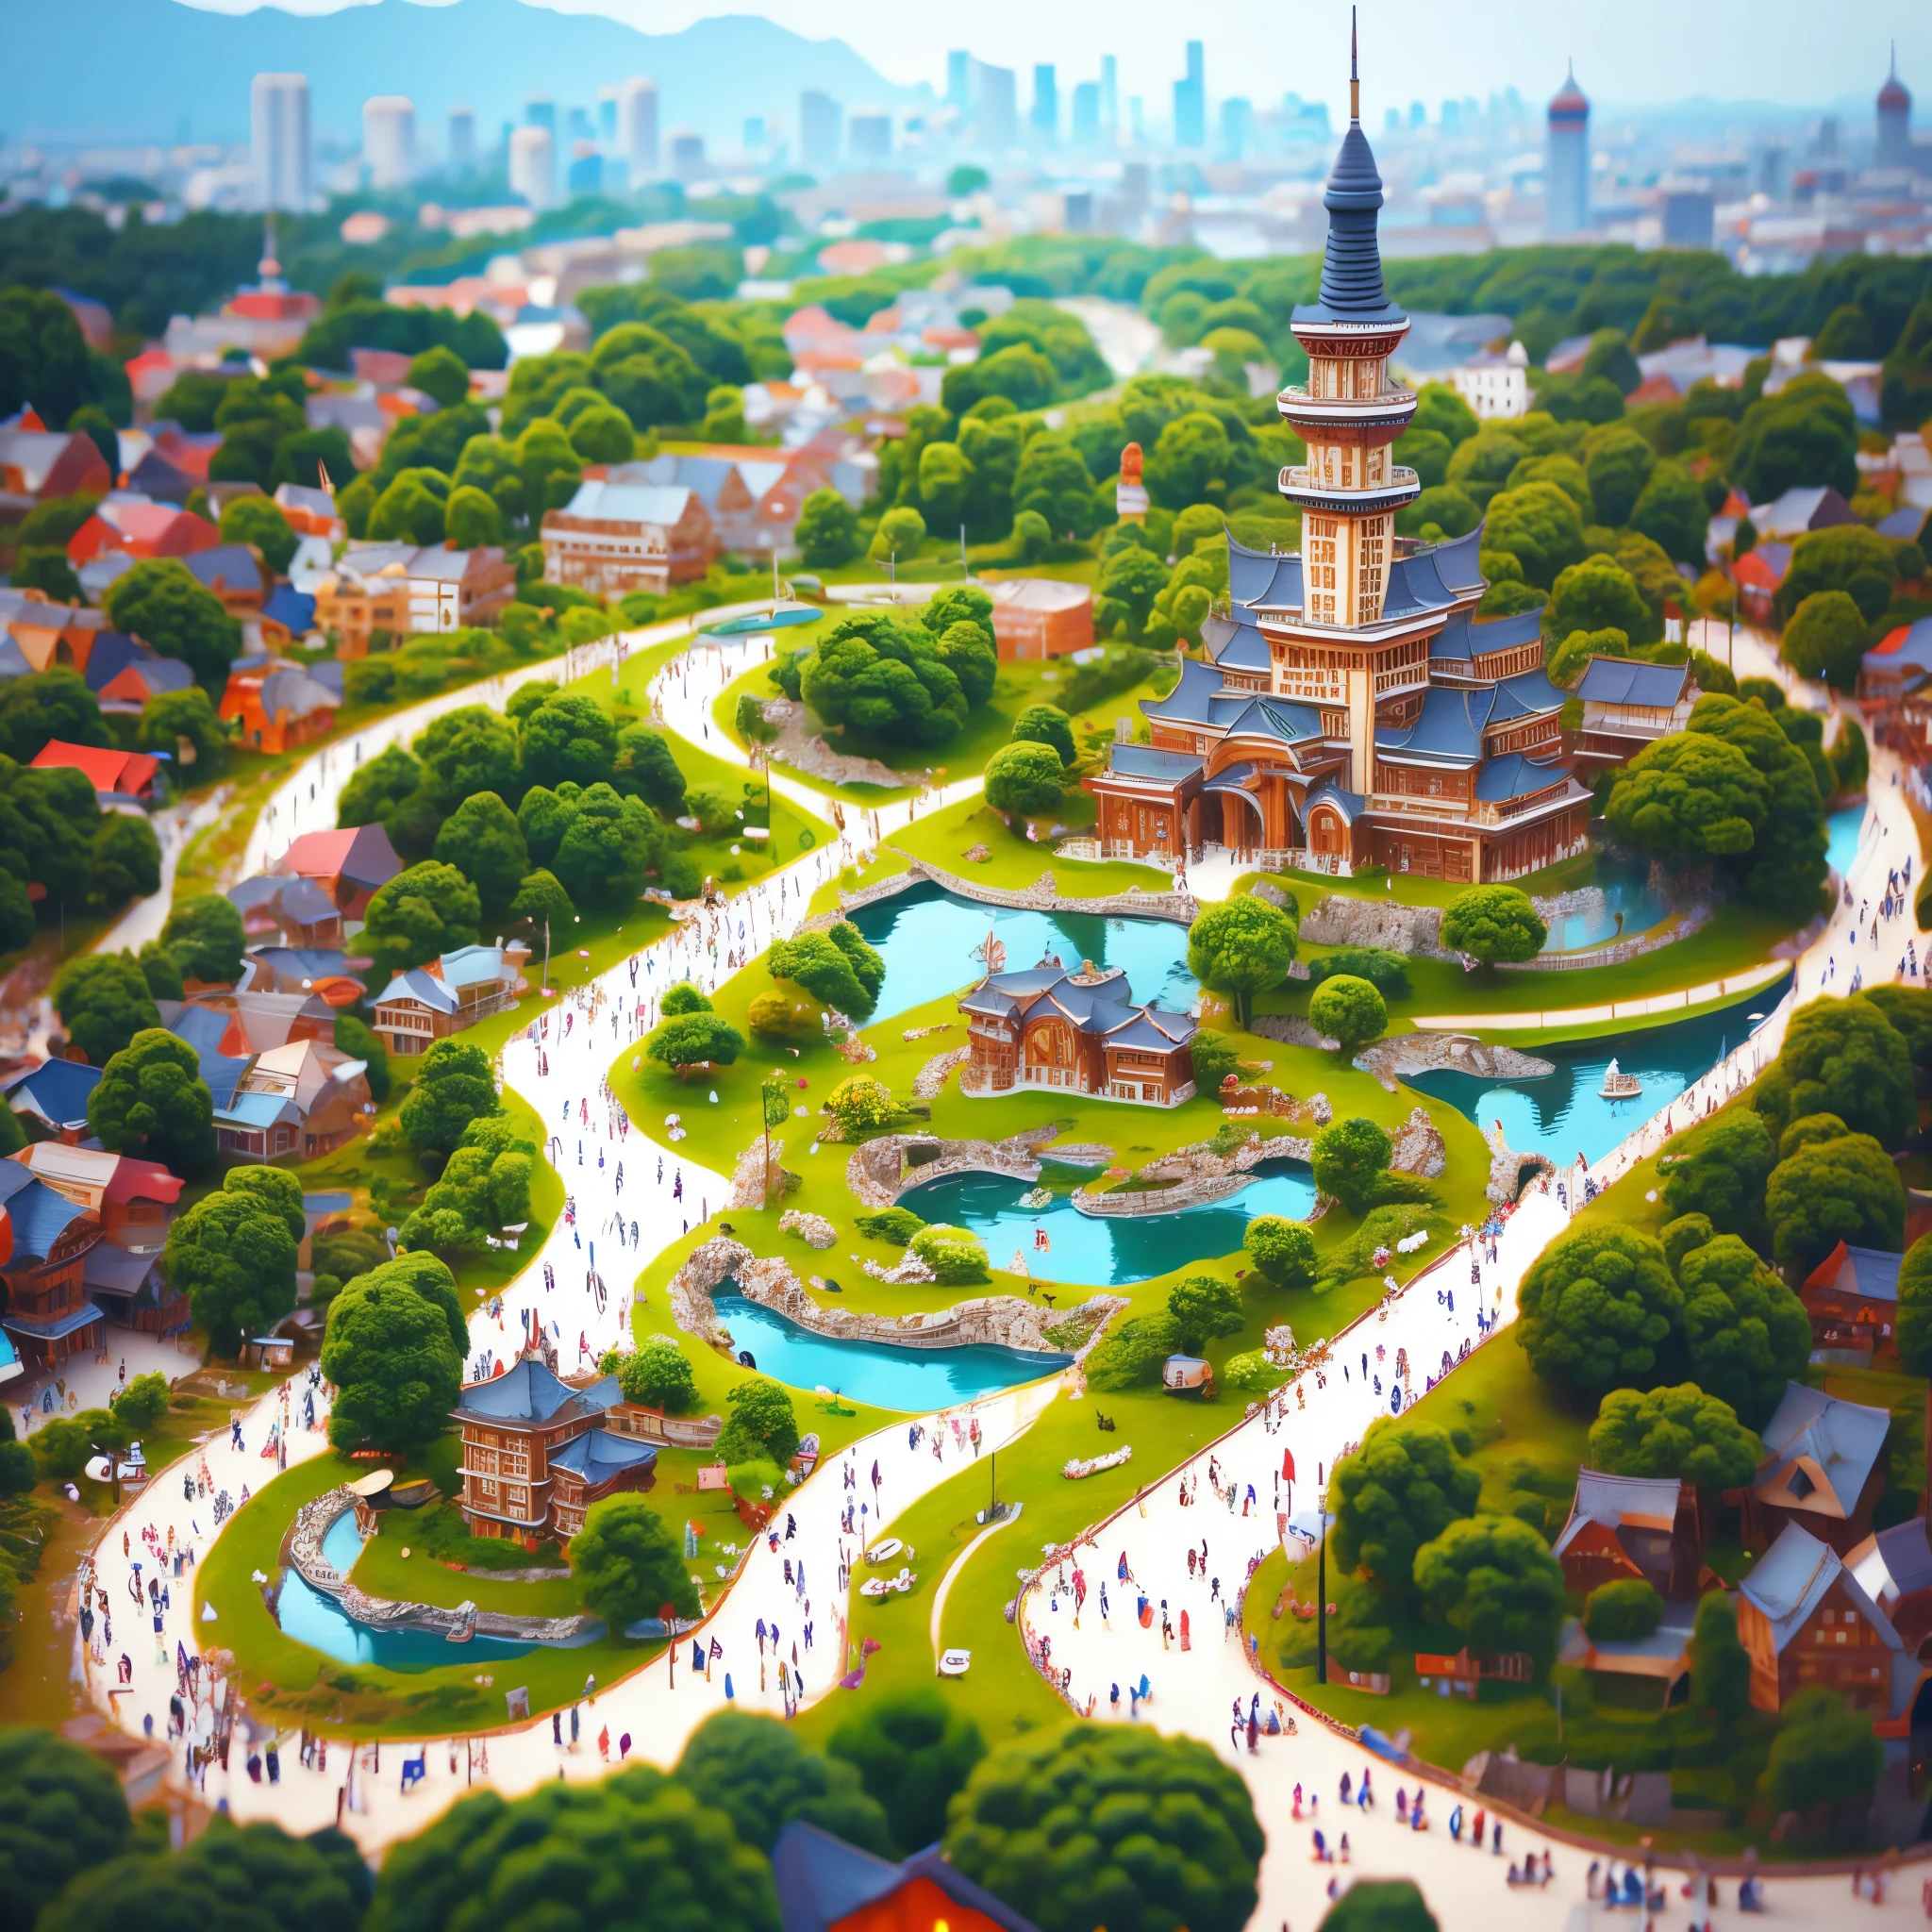 fairy tale_town，miniature， Super Cute clayWorld，isometric vieWof Shanghai
City，Cute clayfreeZe frame animation， Cute OrientalPearl
TVTOWer， City， CarS， peOple， trees，graSS，tilt shift， eXCellent
lighting，Volume， landsCape，brush rendering， 3D，Super detail,